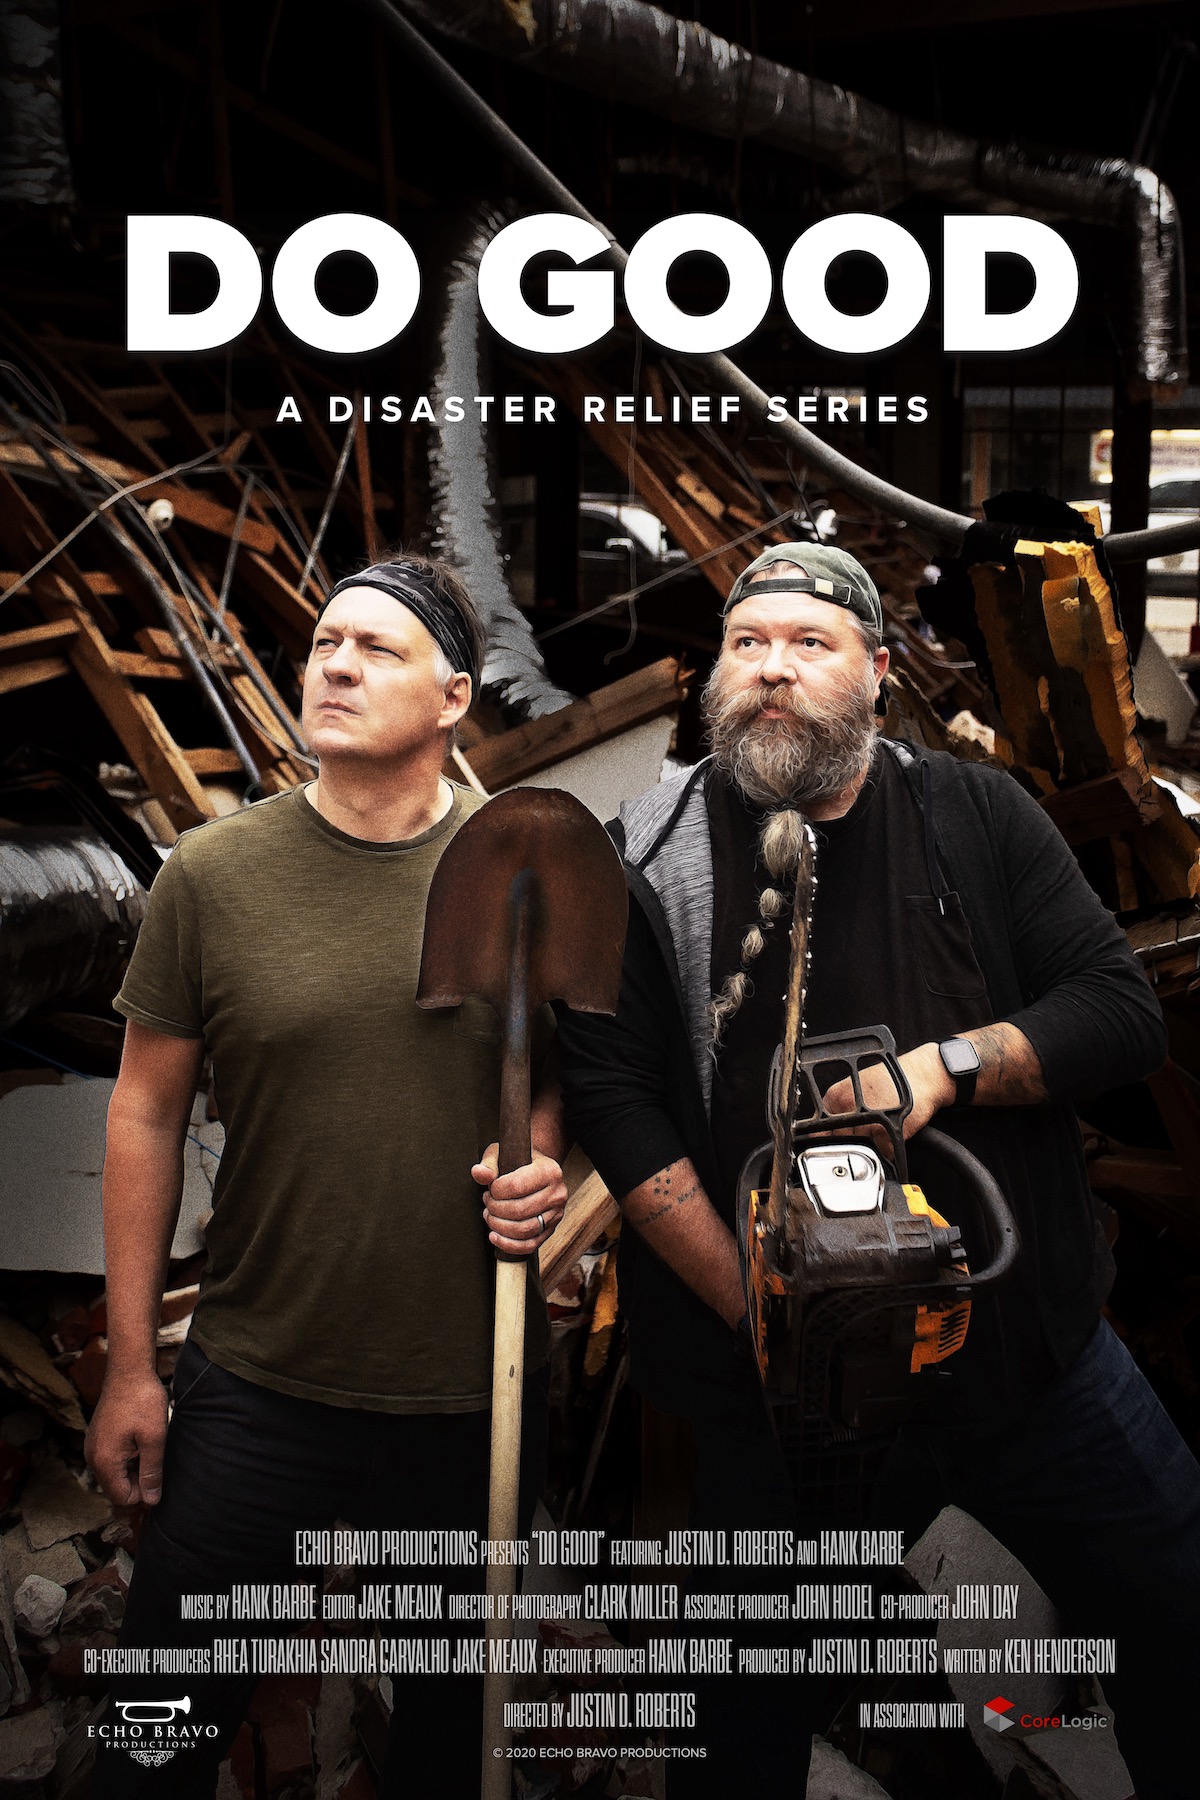 Watch ‘DO GOOD’ to Support Relief Efforts Starting This Friday